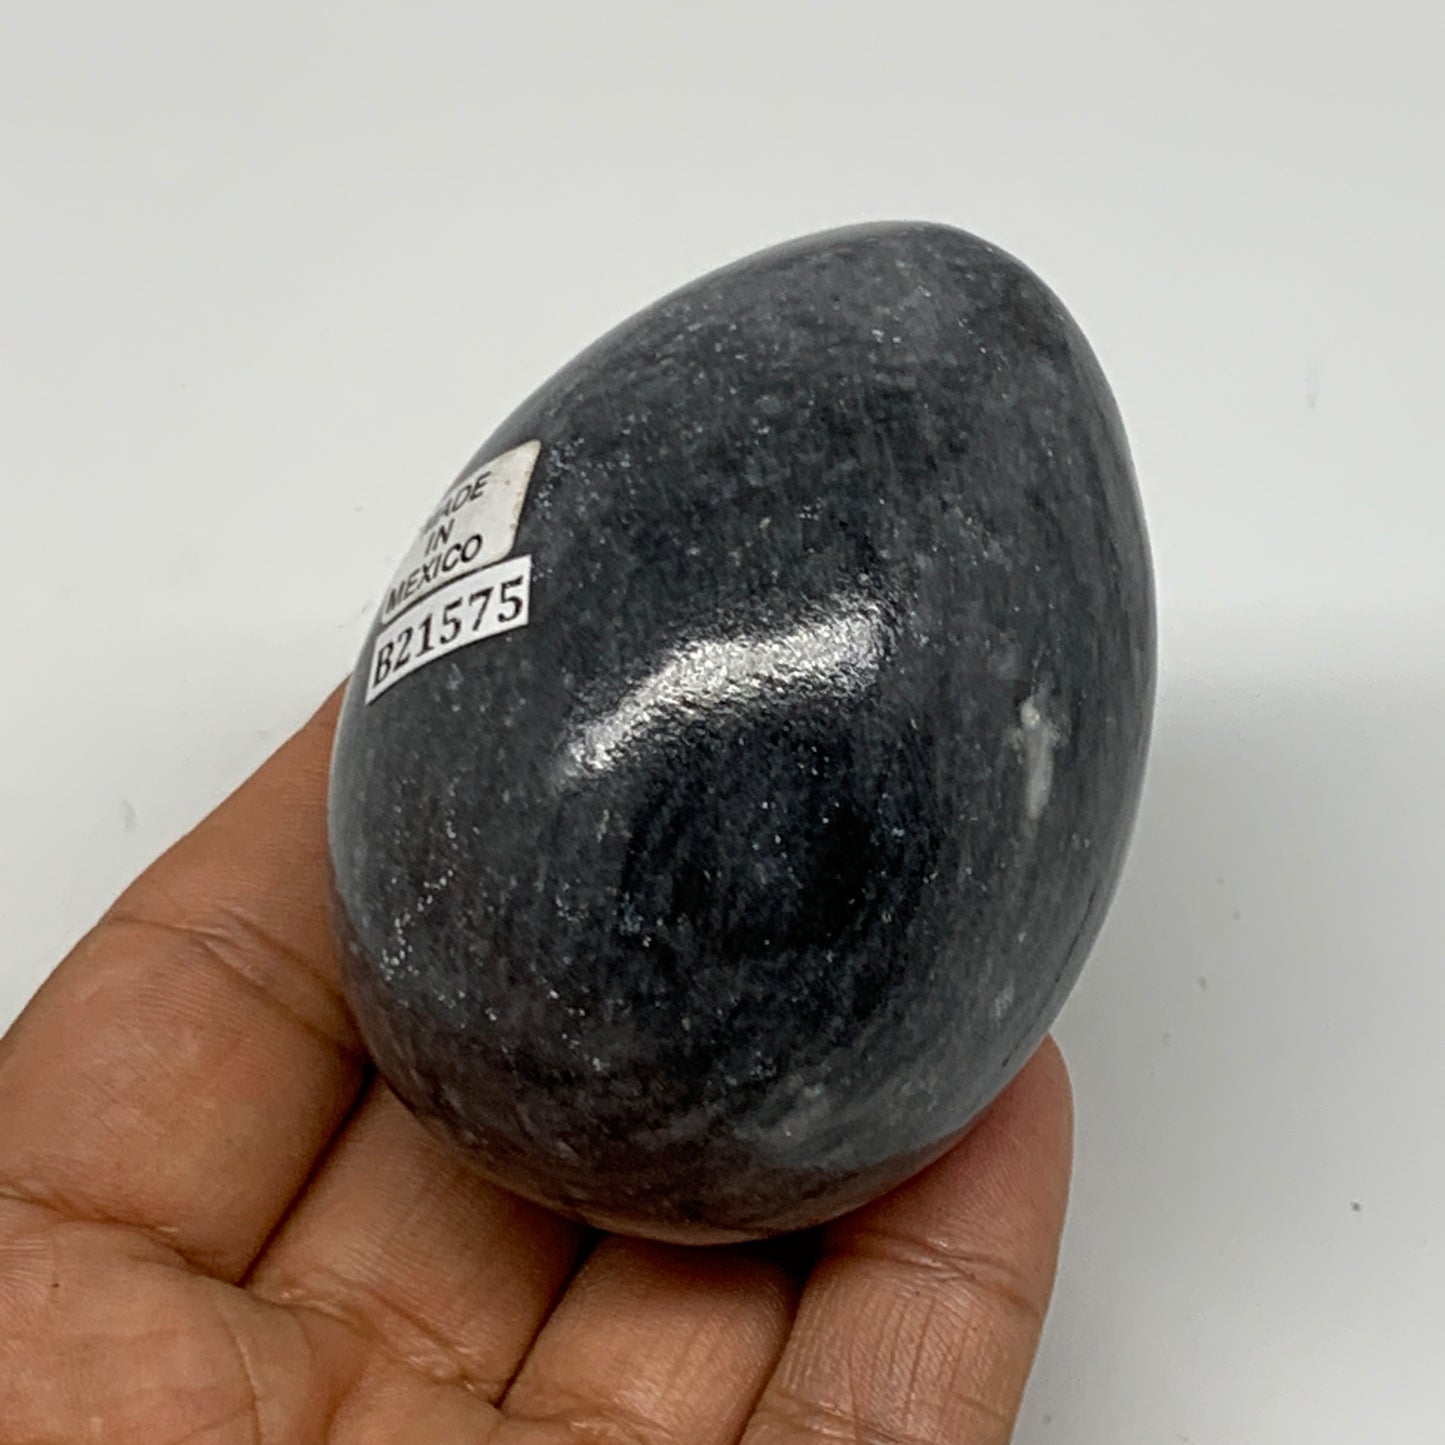 215.2g, 2.6"x1.9" Natural Gray Onyx Egg Gemstone Mineral, from Mexico, B21575